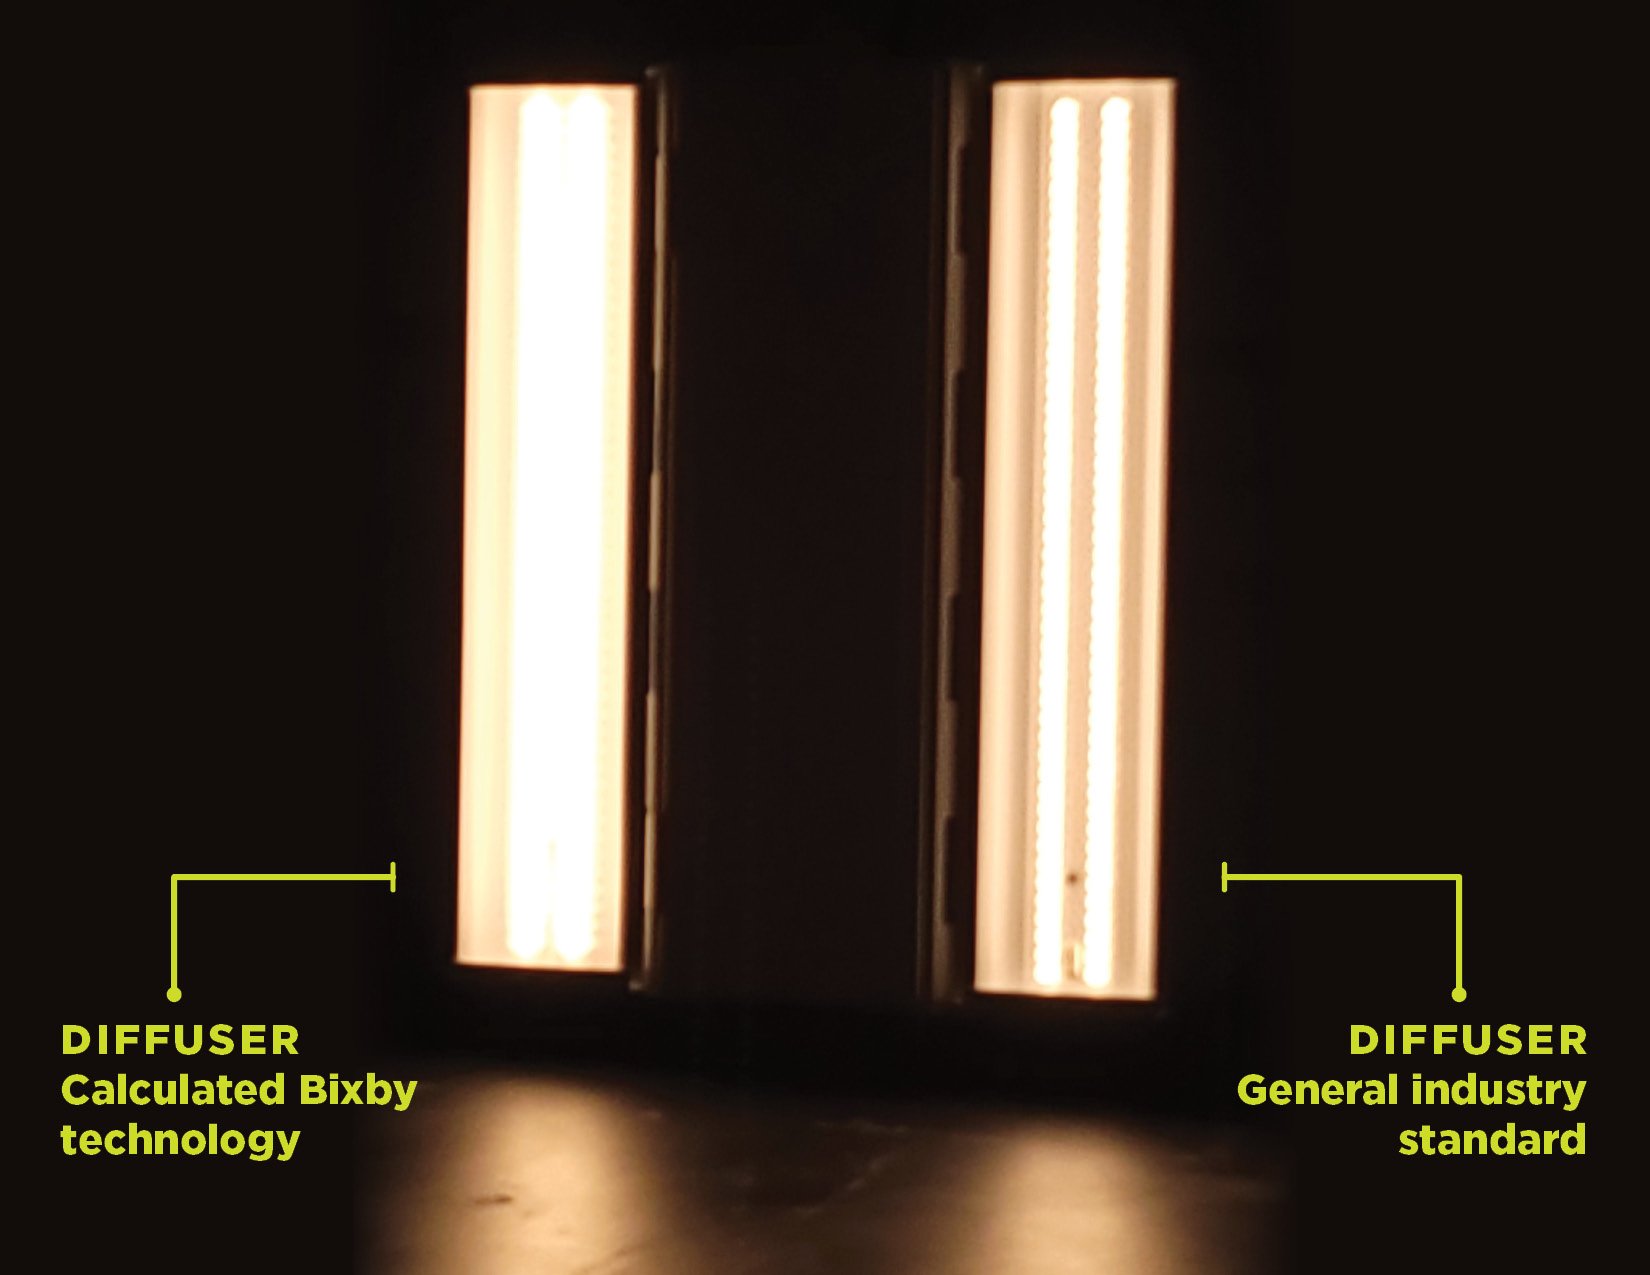 Bixby Optical - Comparison of Bixby diffuser technology and the general industry standard